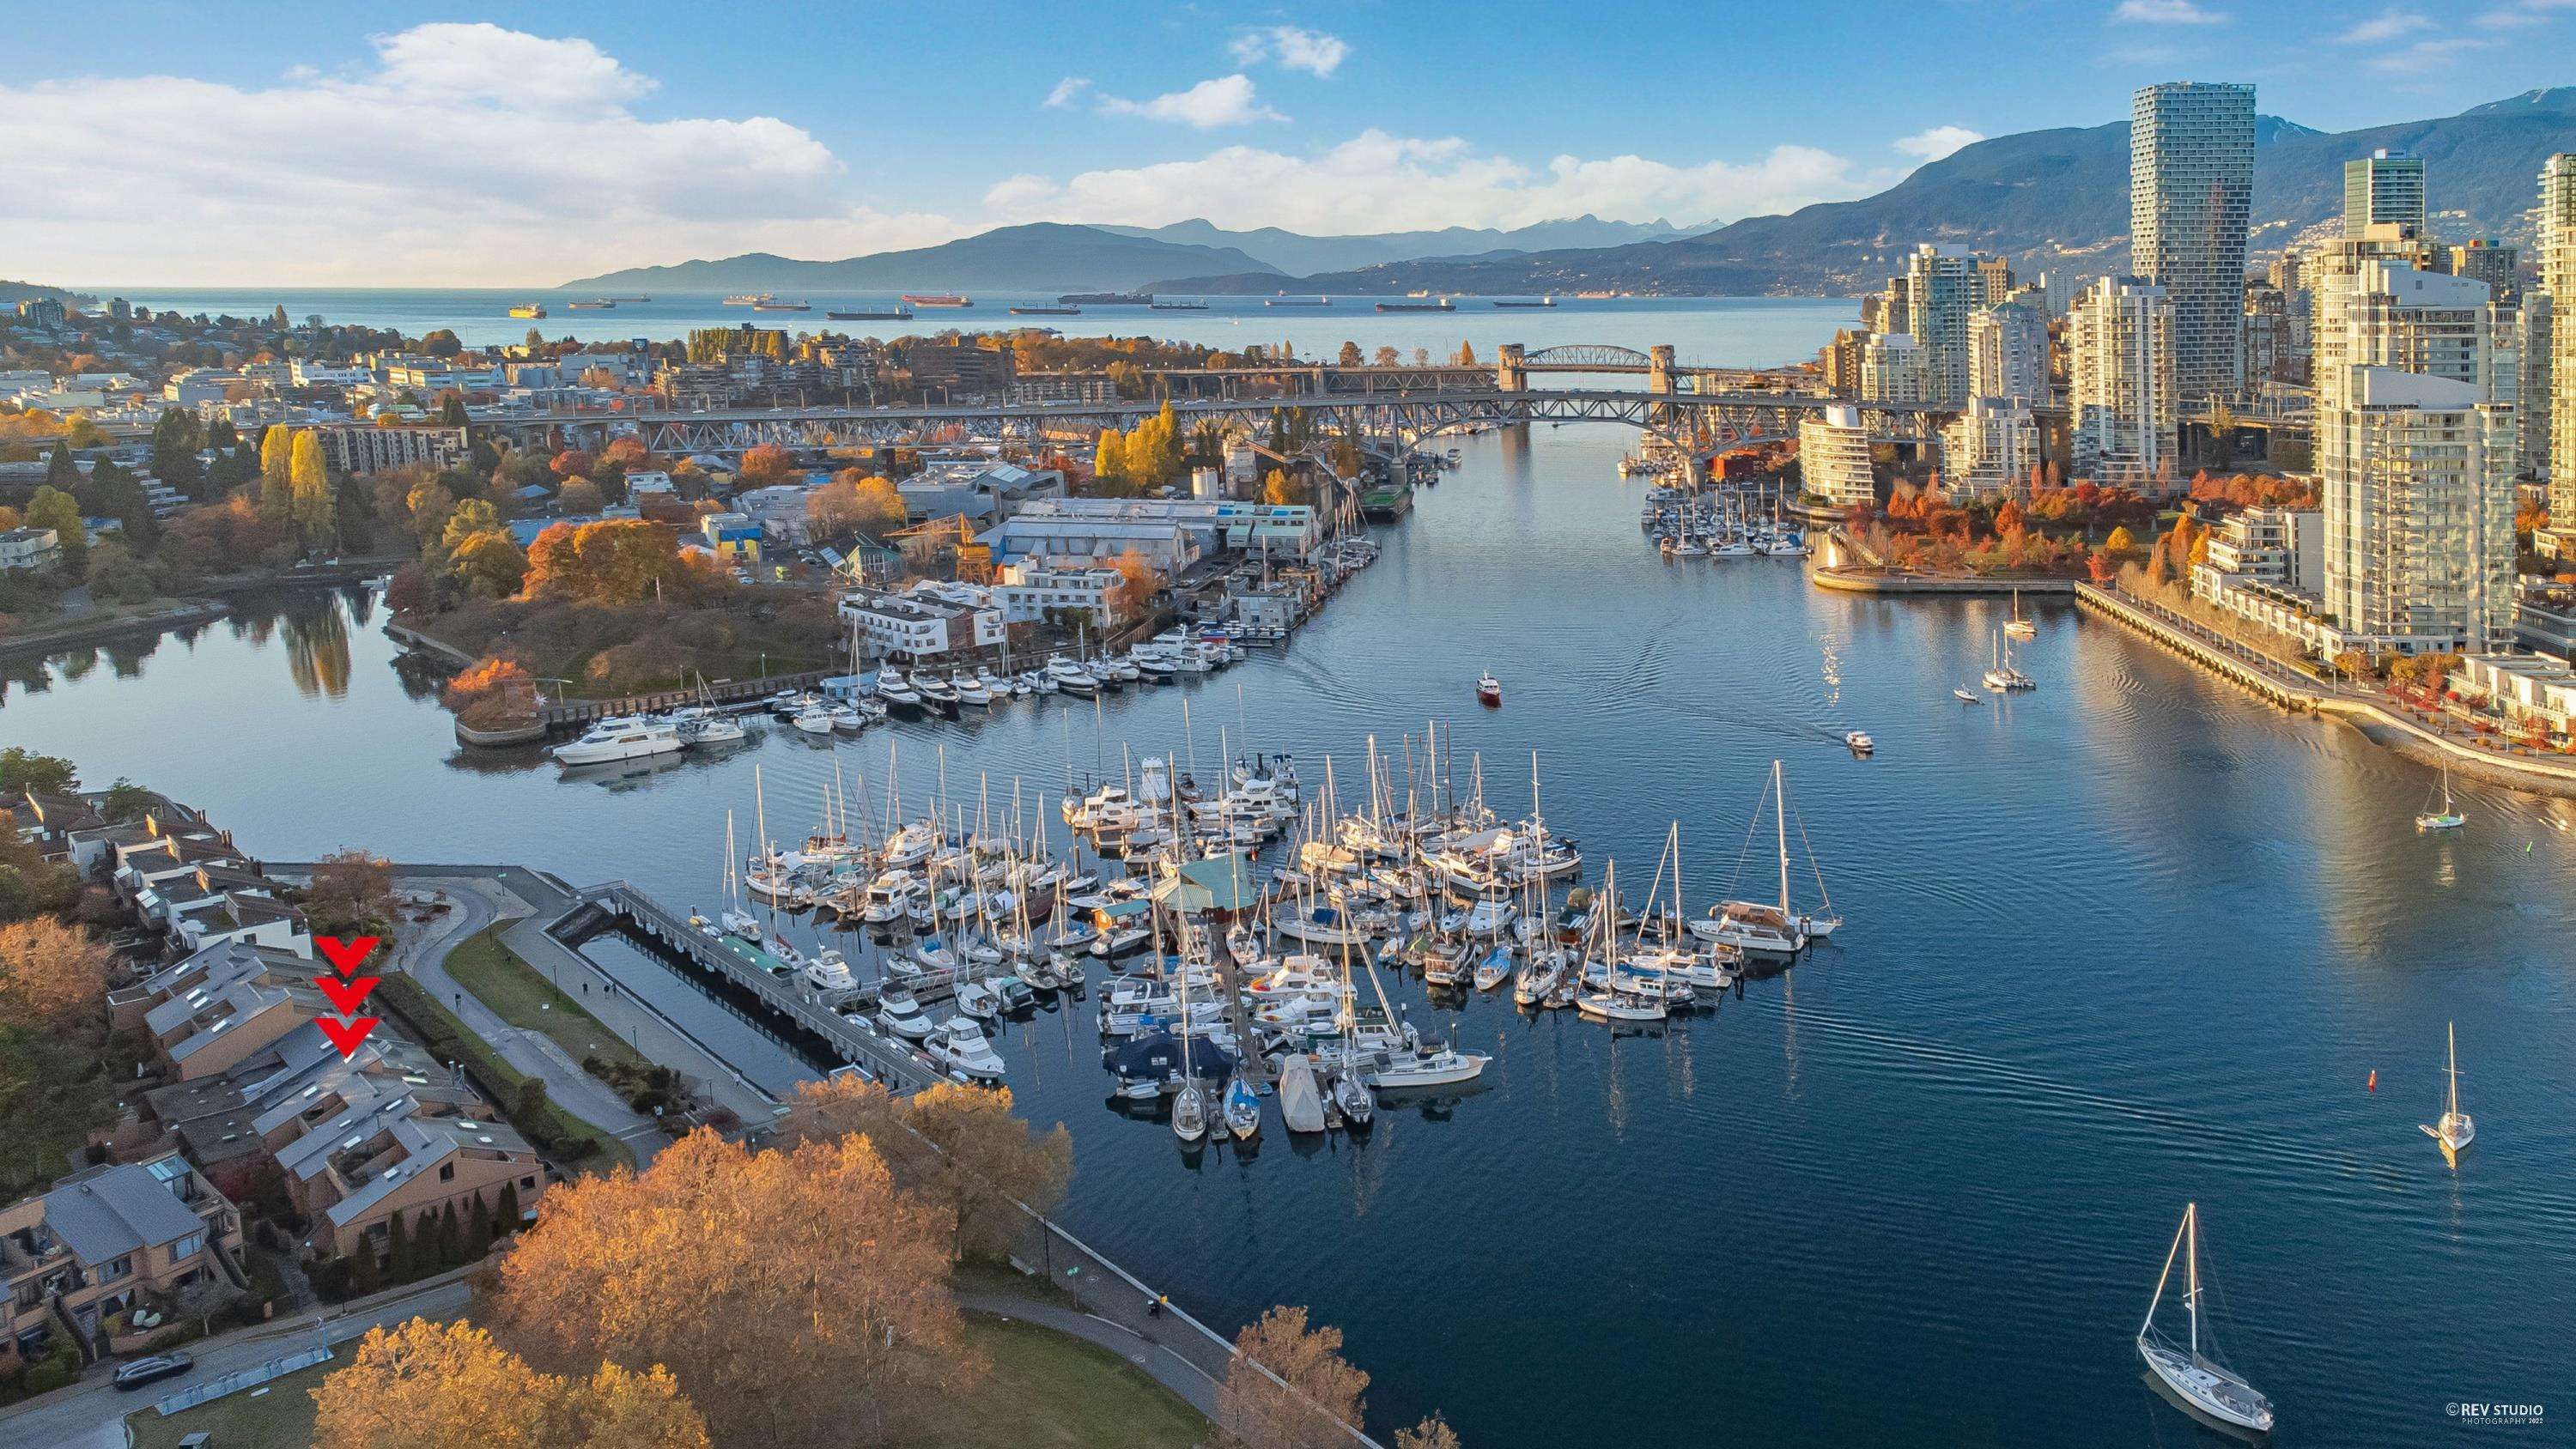 Open House. Open House on Sunday, February 5, 2023 2:00PM - 4:00PM
WATERFRONT TOWNHOUSE w/stunning water, marina, cityscape and mtn views. 180 degree views W out to English Bay sunsets and E to the Cambie St. Bridge sunrises. Renovated by Colbrone Archite